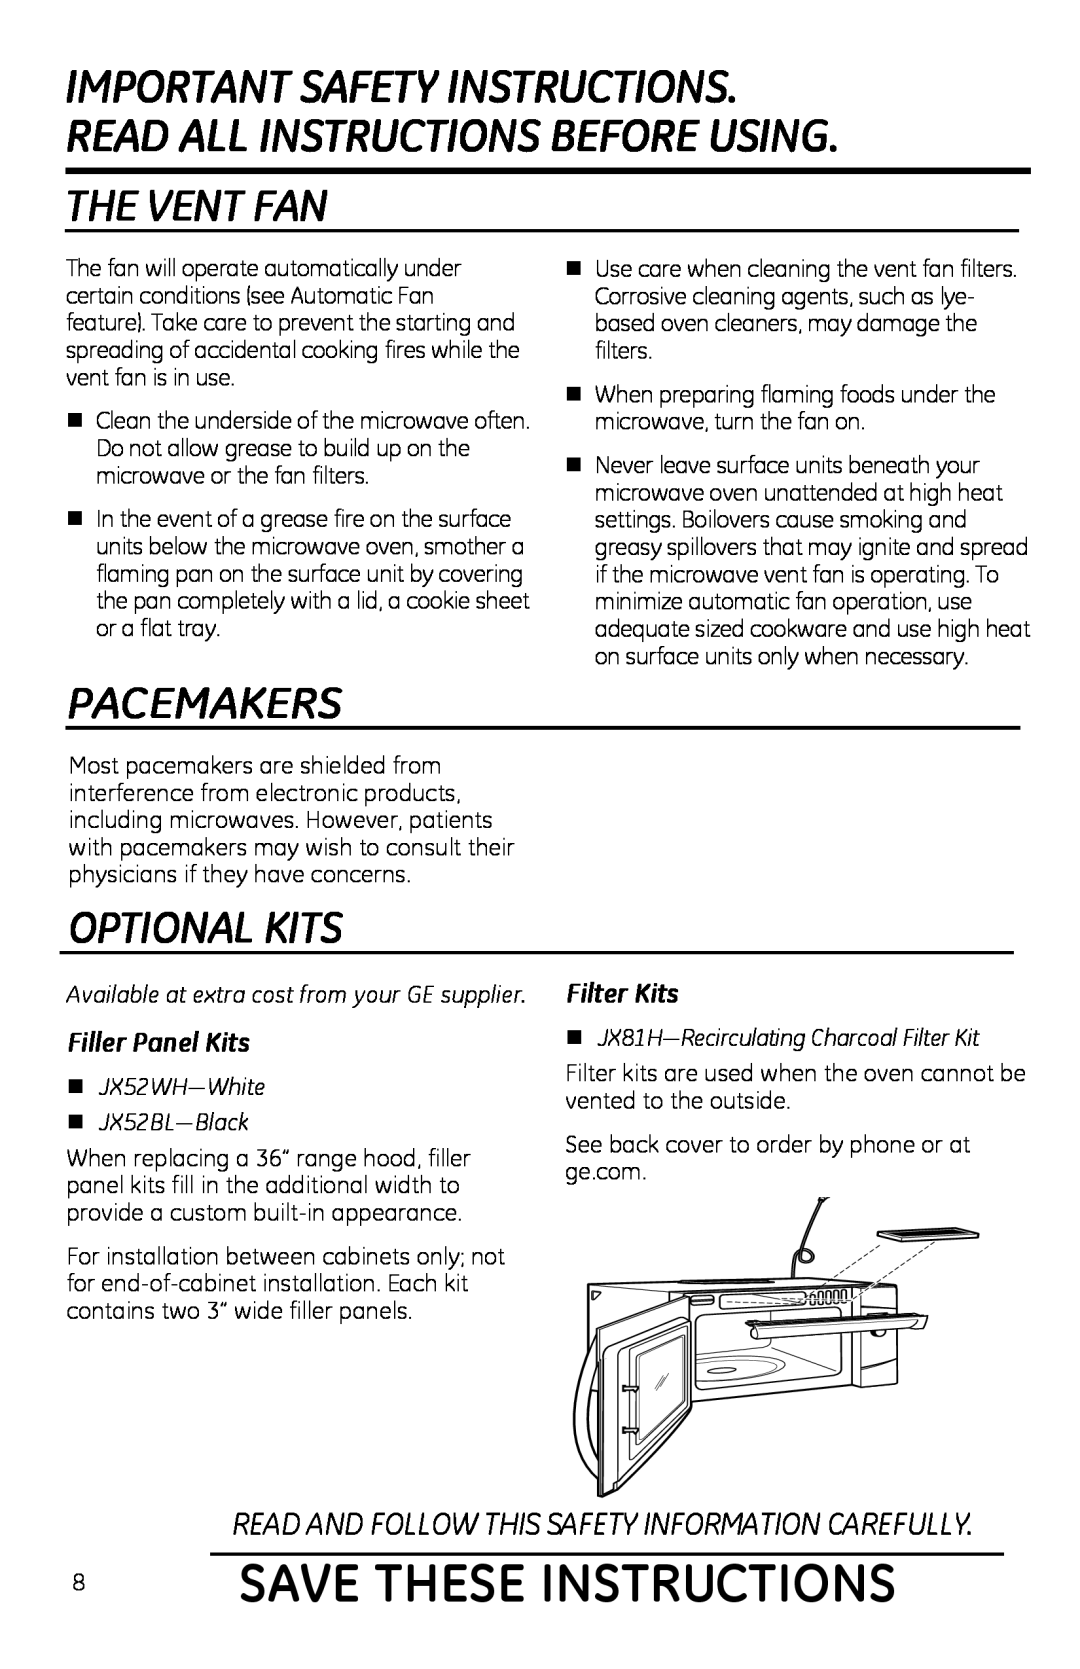 GE PVM1970 owner manual Save These Instructions, The Vent Fan, Pacemakers, Optional Kits, Filler Panel Kits, Filter Kits 